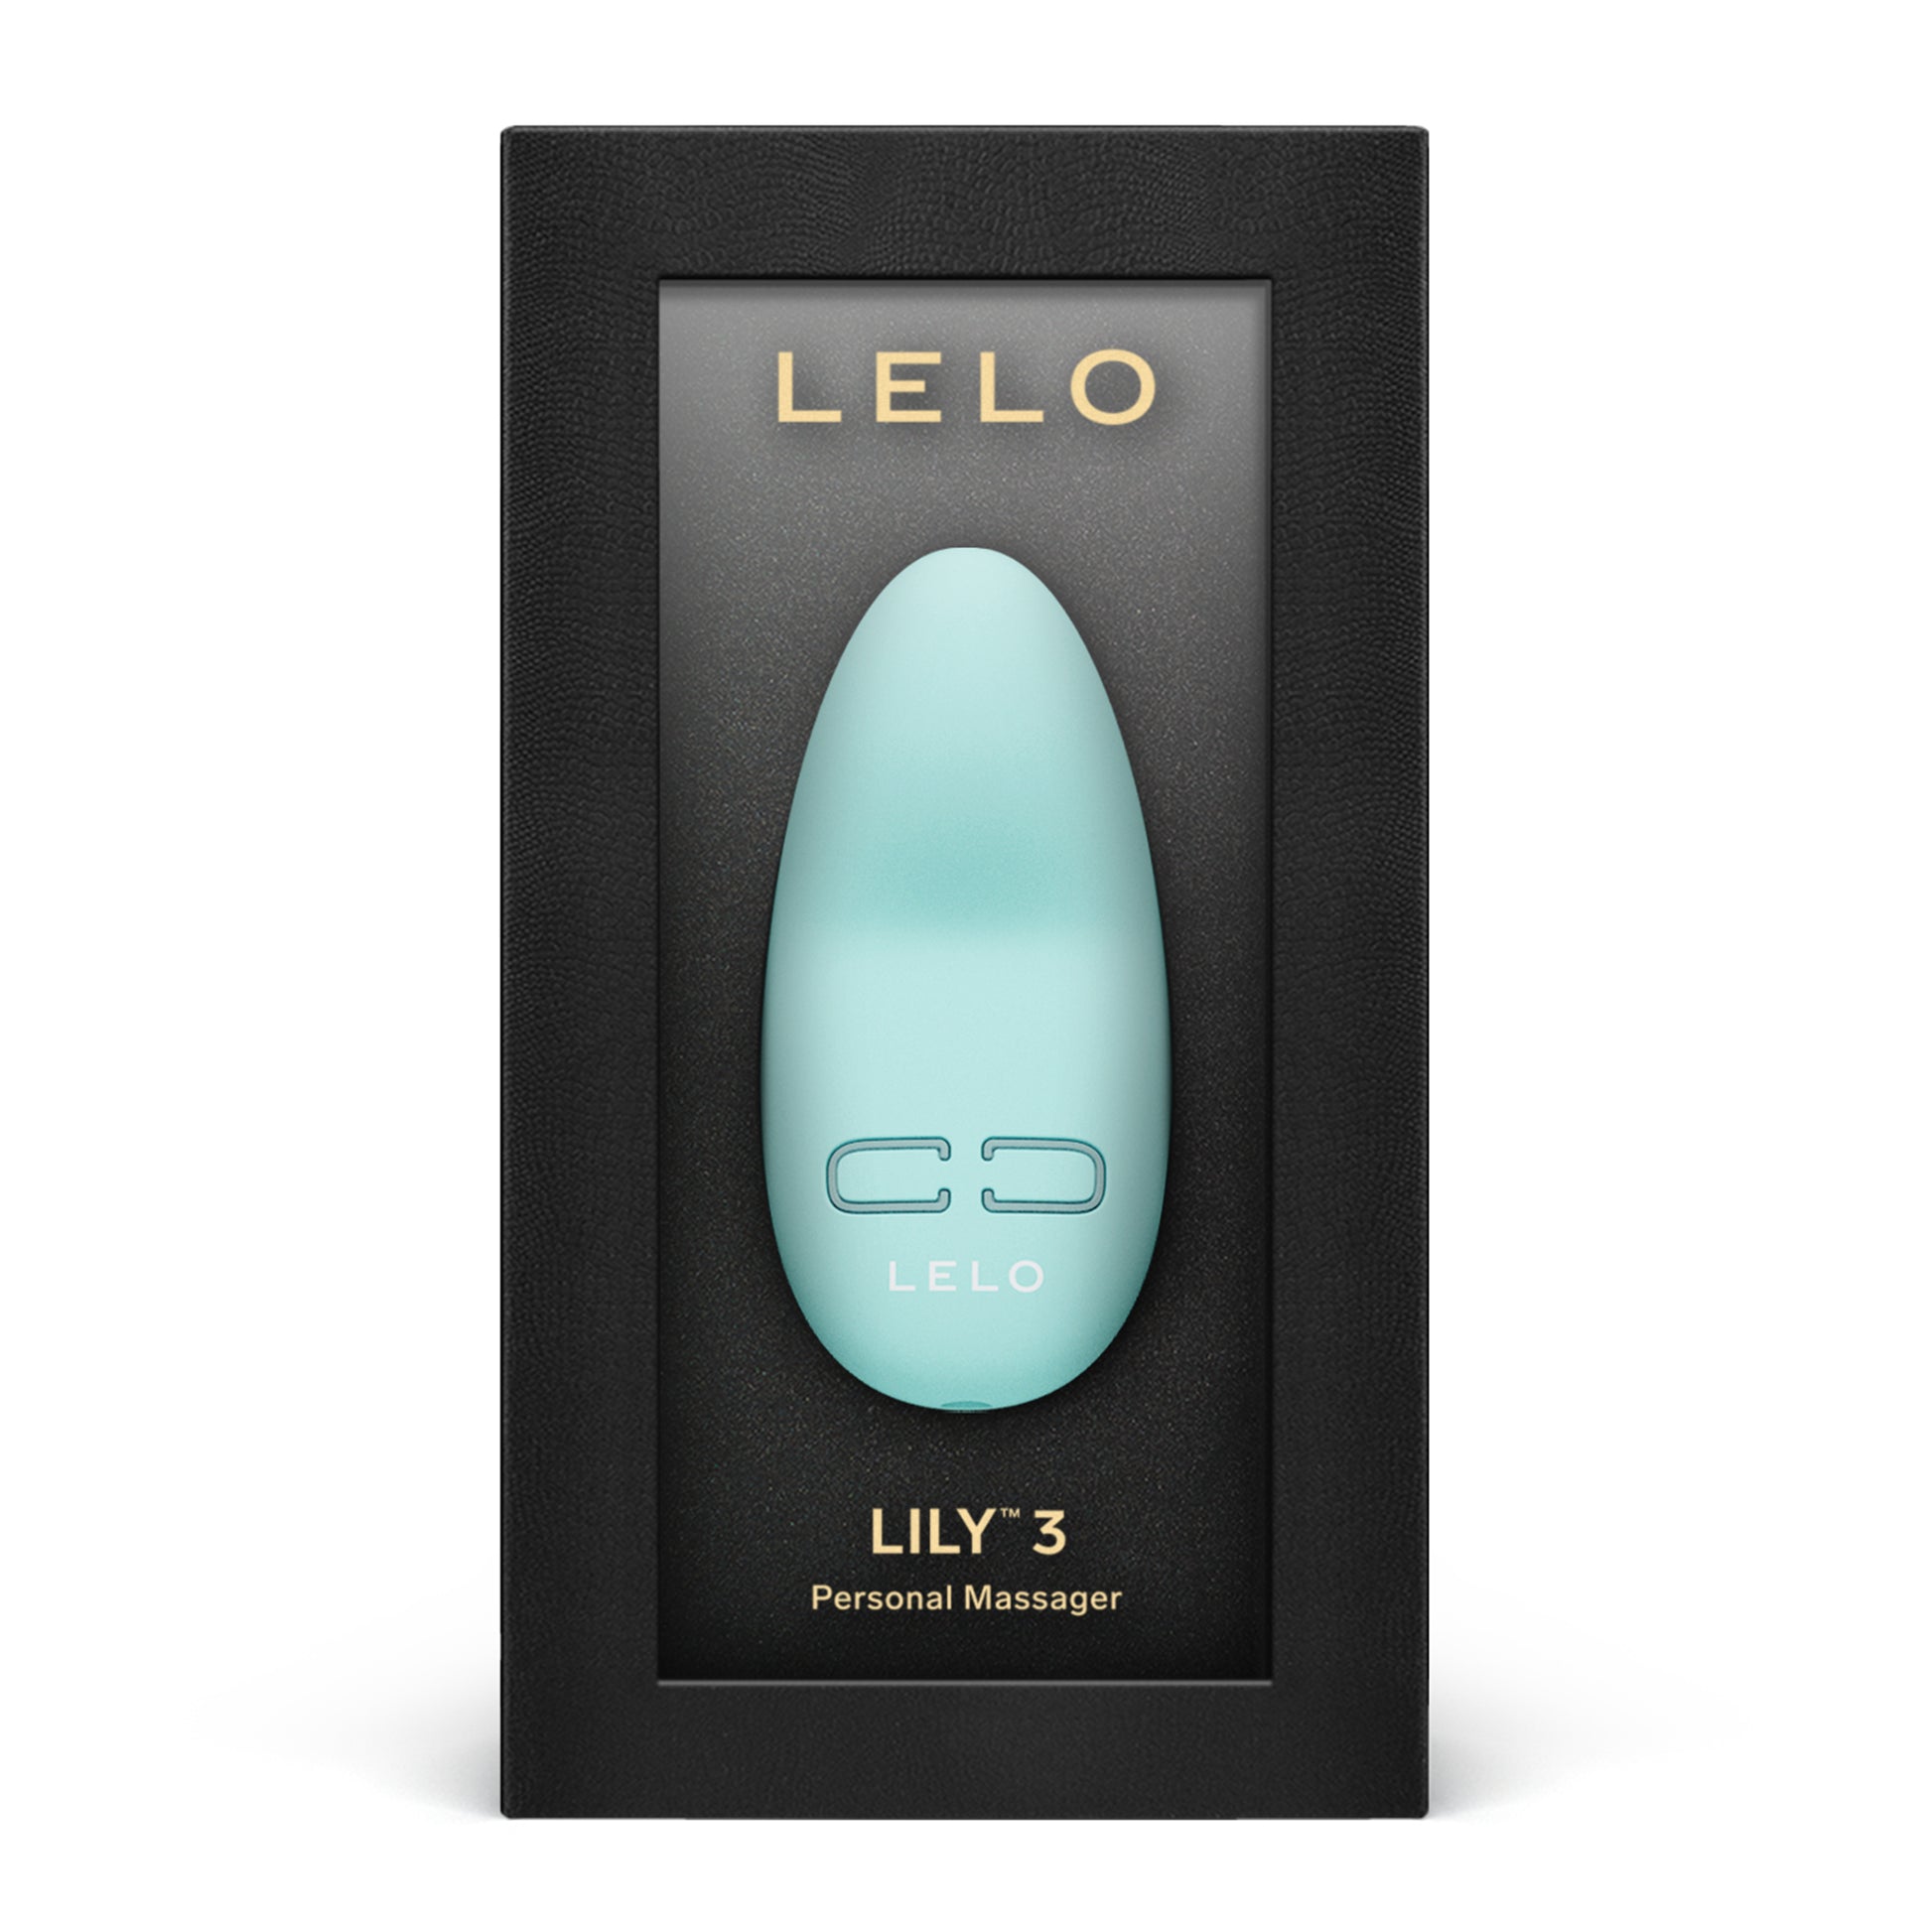 Lelo - Lily 3 Personal Massager Polar Green - 3